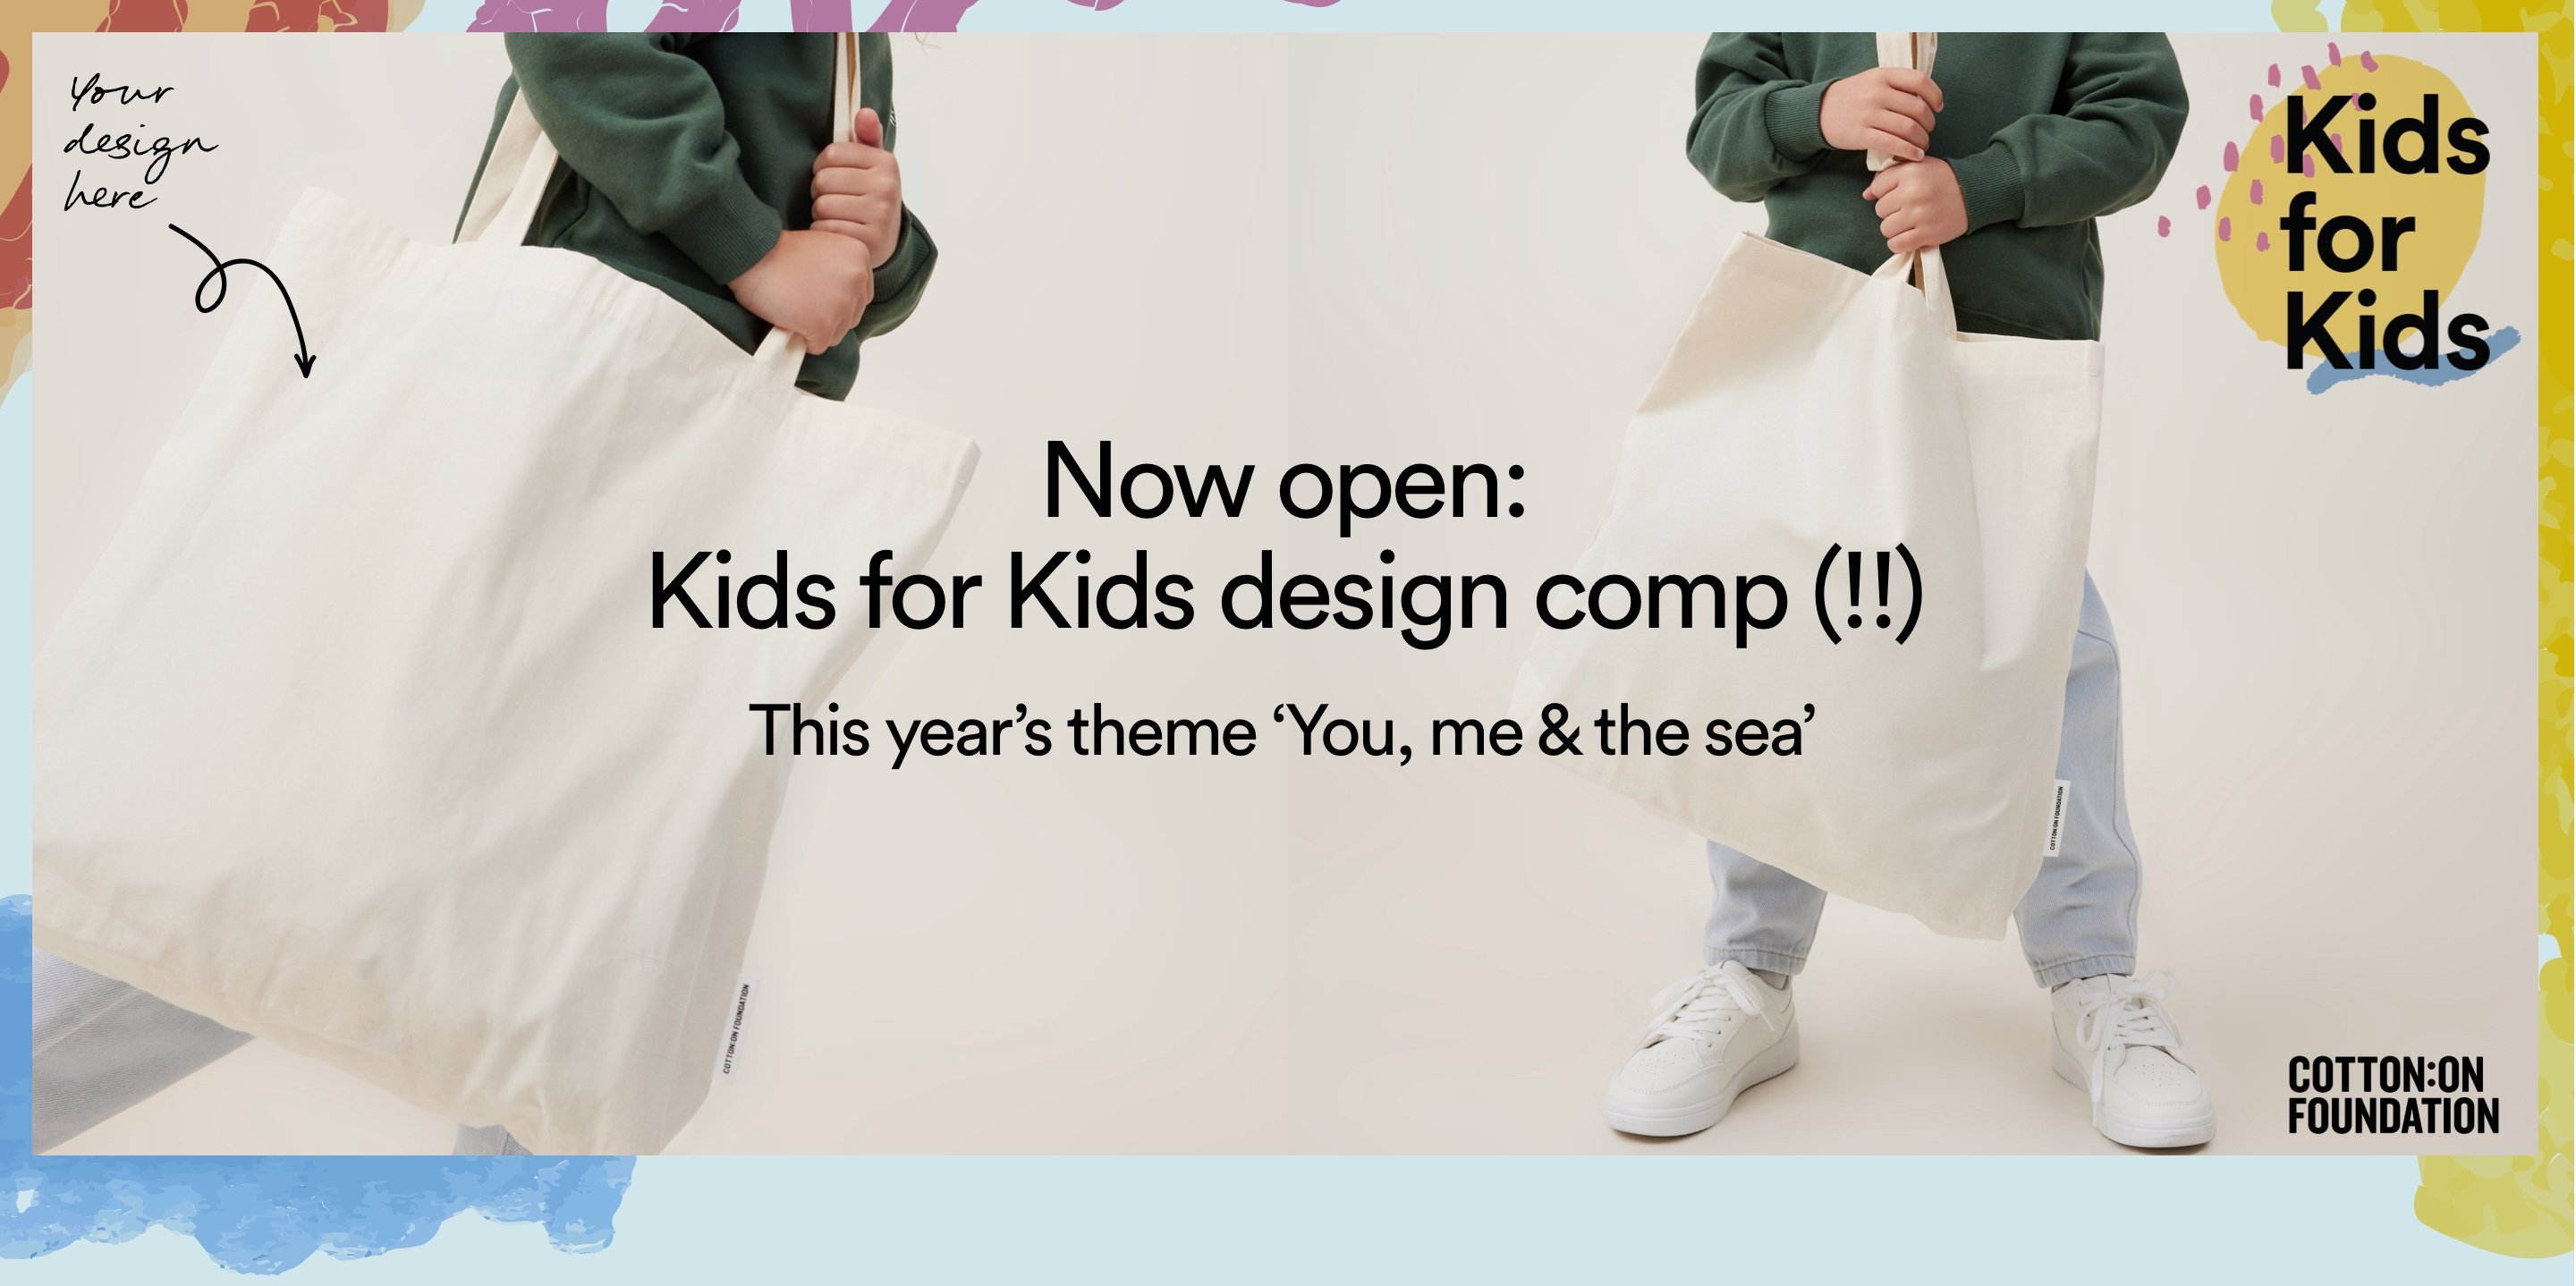 Now open: Kids for Kids design comp